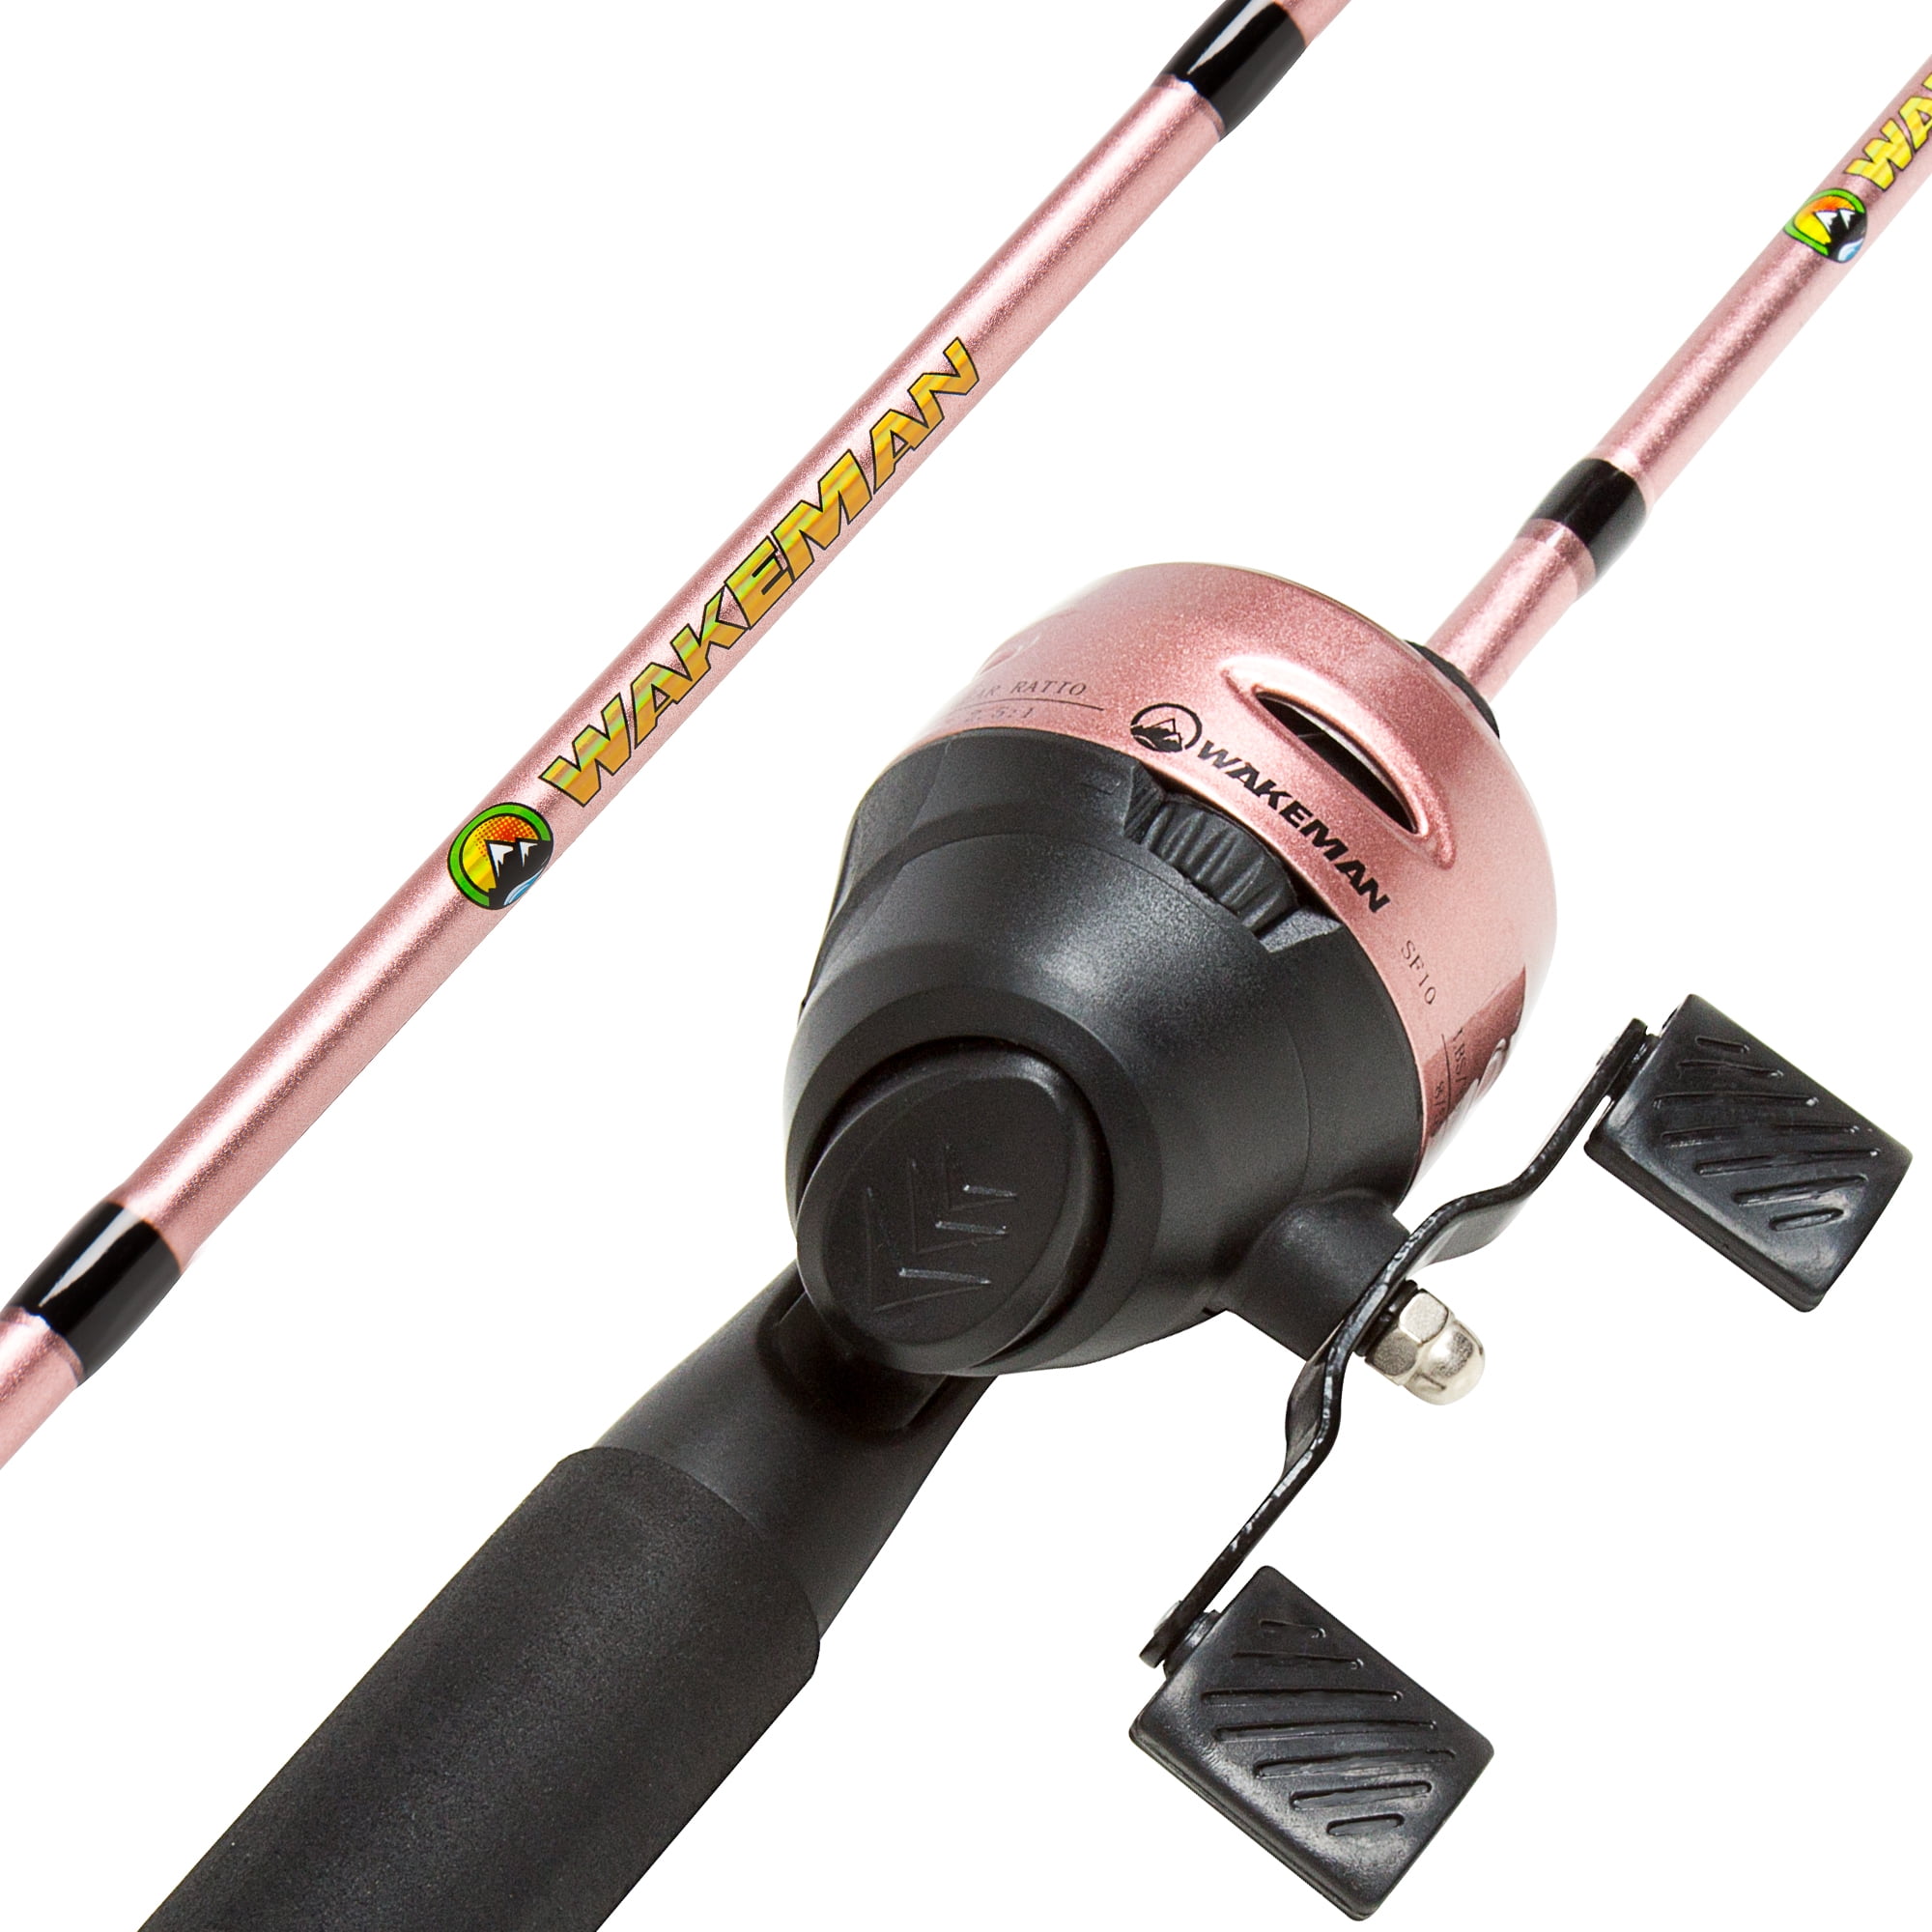 Wakeman Metallic Pink 64 inch Spinning Rod and Reel Combo, Size: 64\